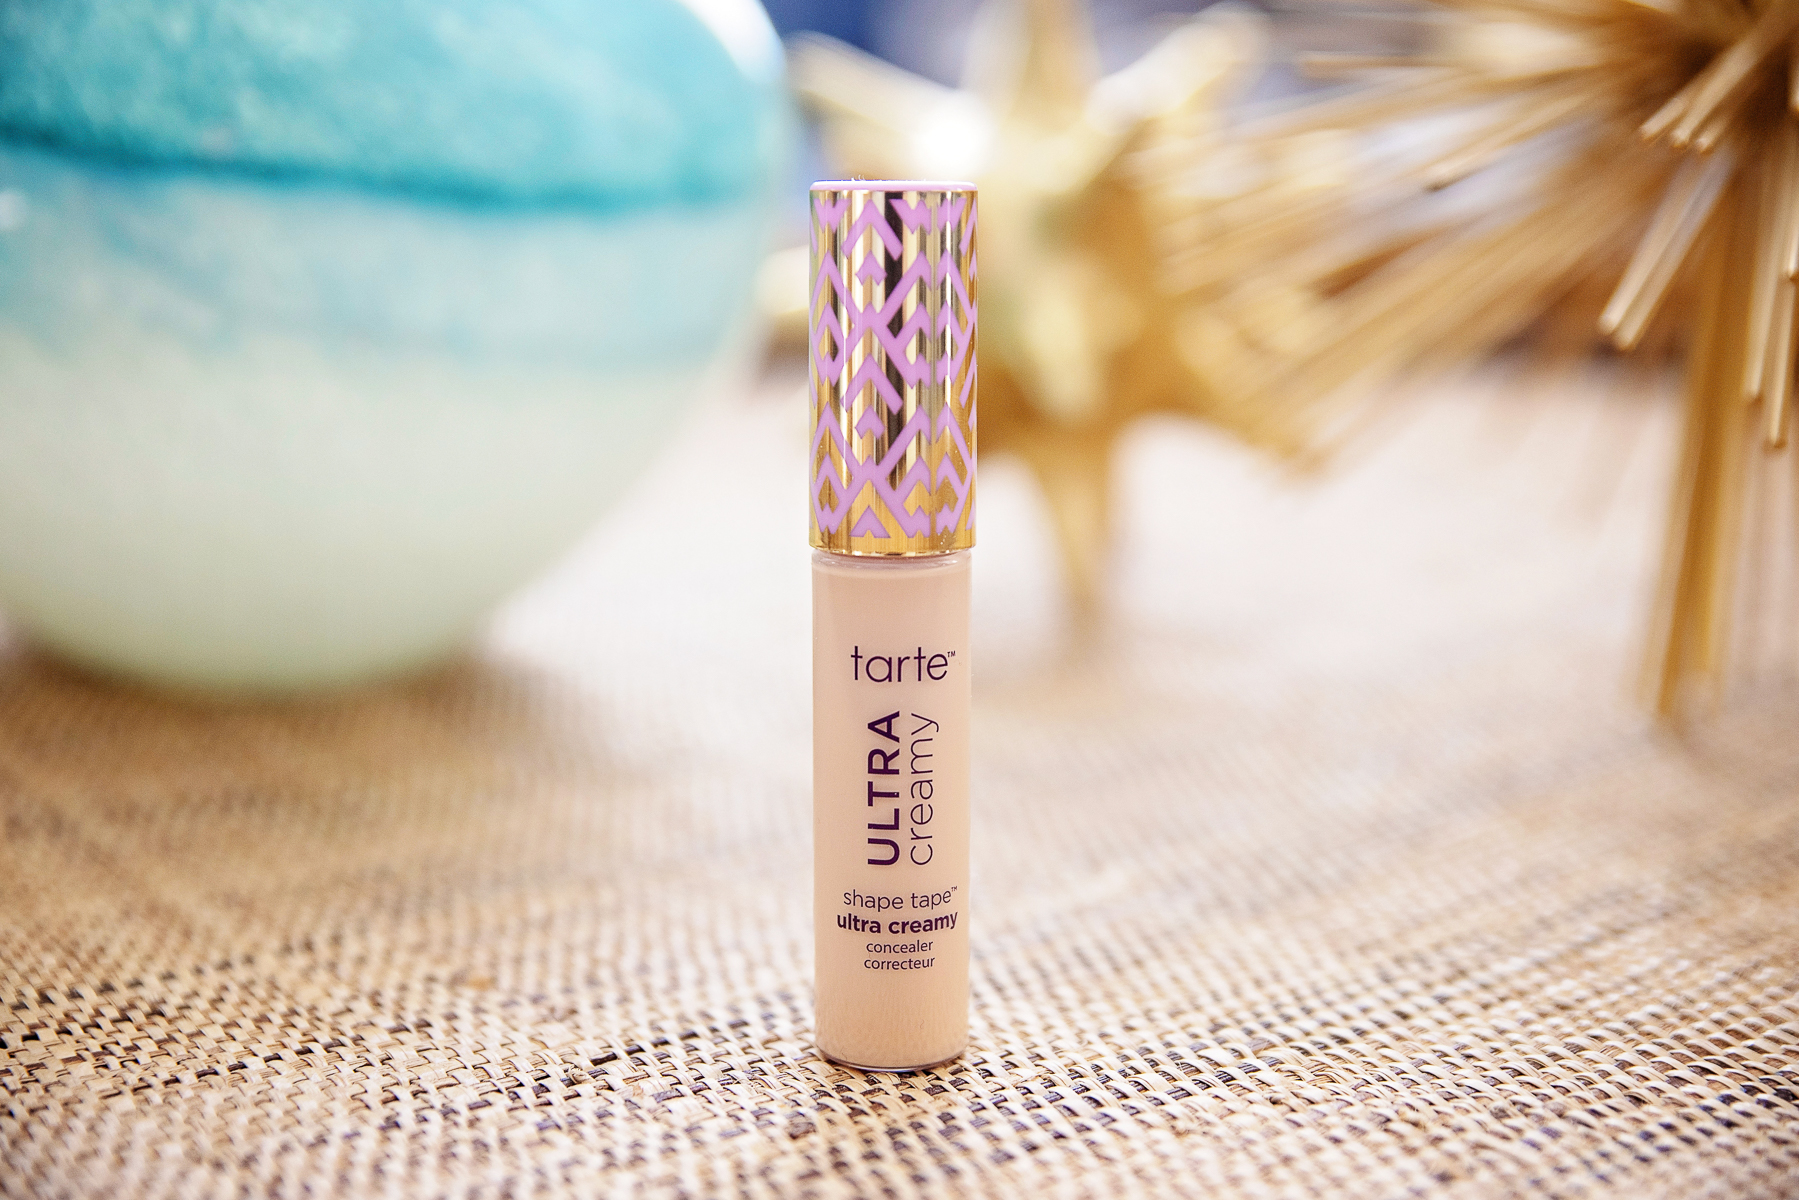 tarte shape tape ultra creamy: a concealer for dry and mature skin